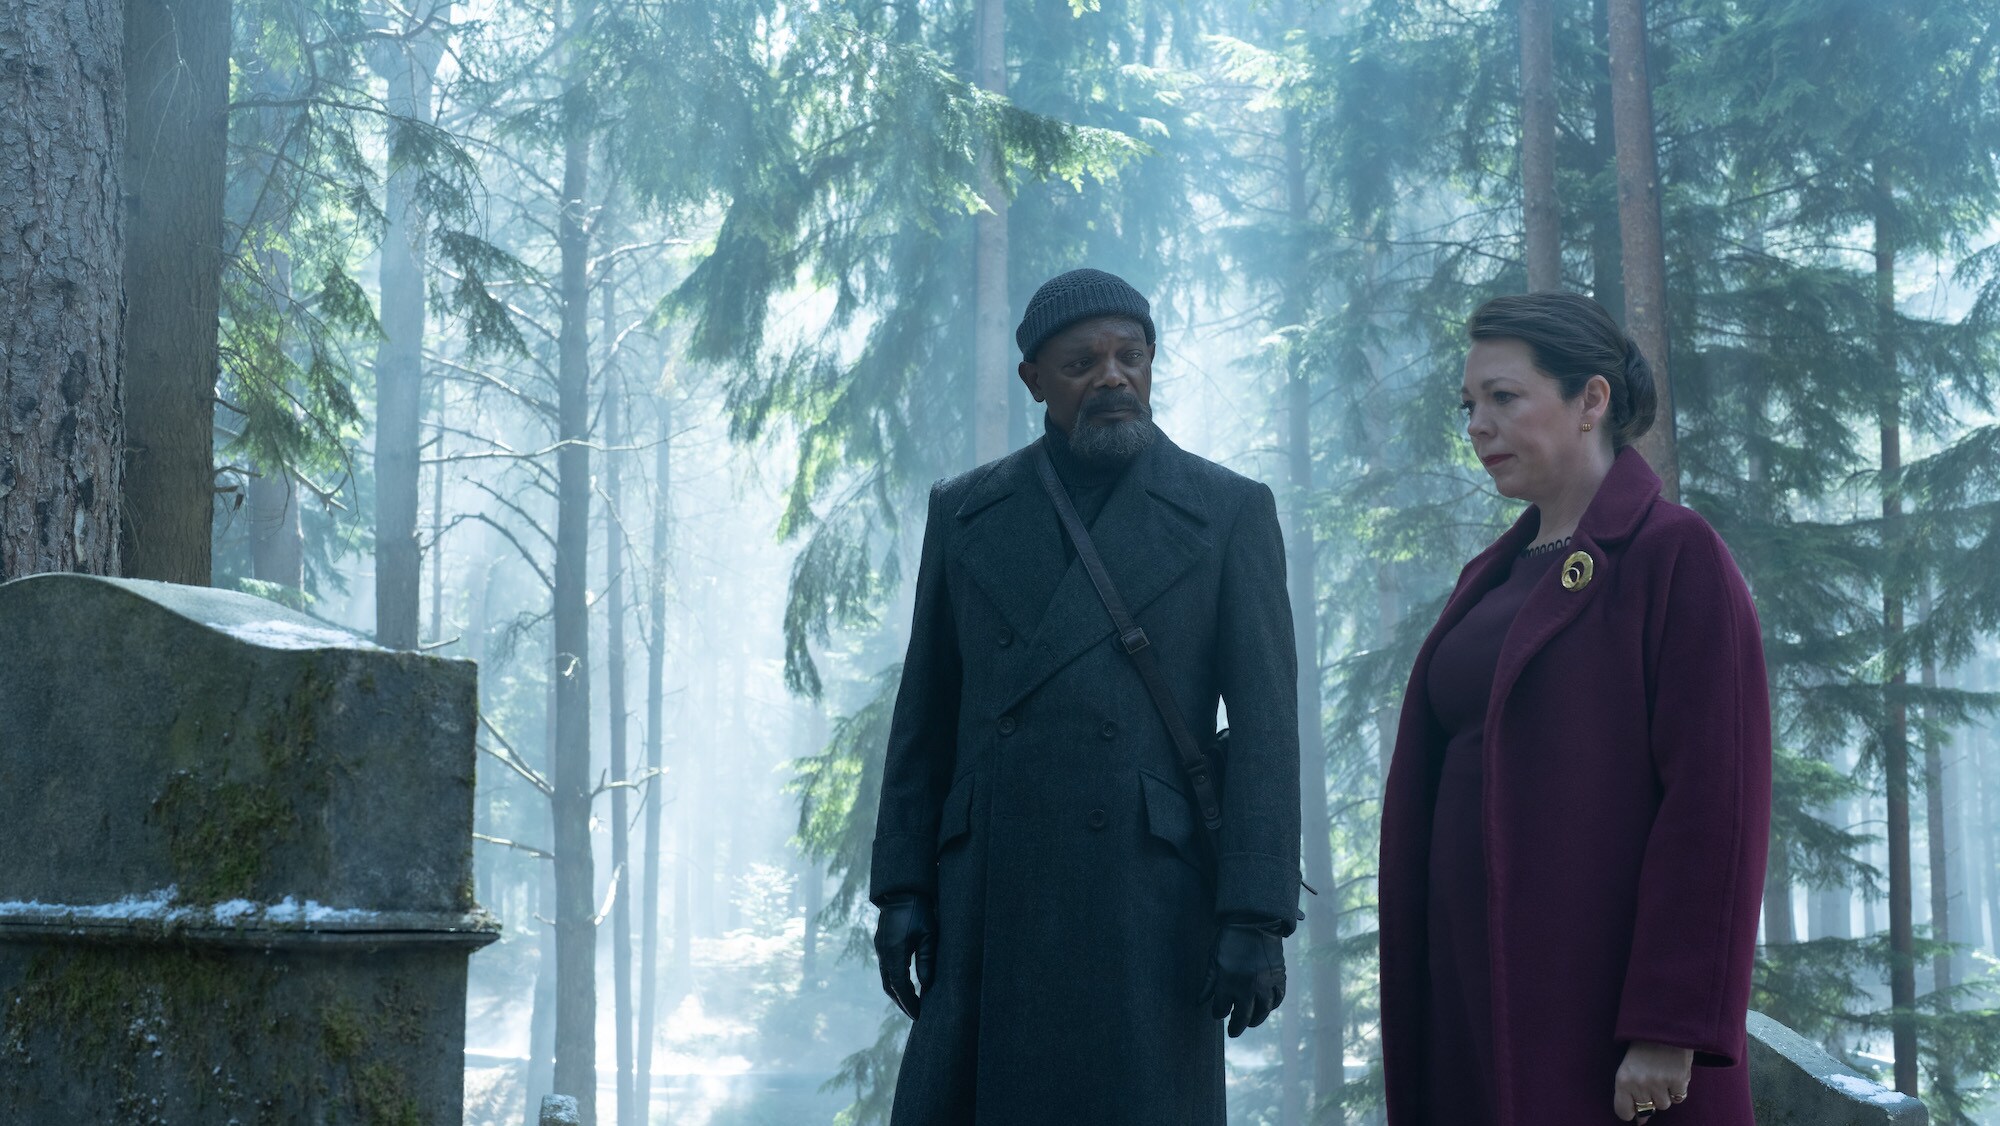 (L-R): Samuel L. Jackson as Nick Fury and Olivia Colman as Special Agent Sonya Falsworth in Marvel Studios' SECRET INVASION, exclusively on Disney+. Photo by Des Willie. © 2023 MARVEL.